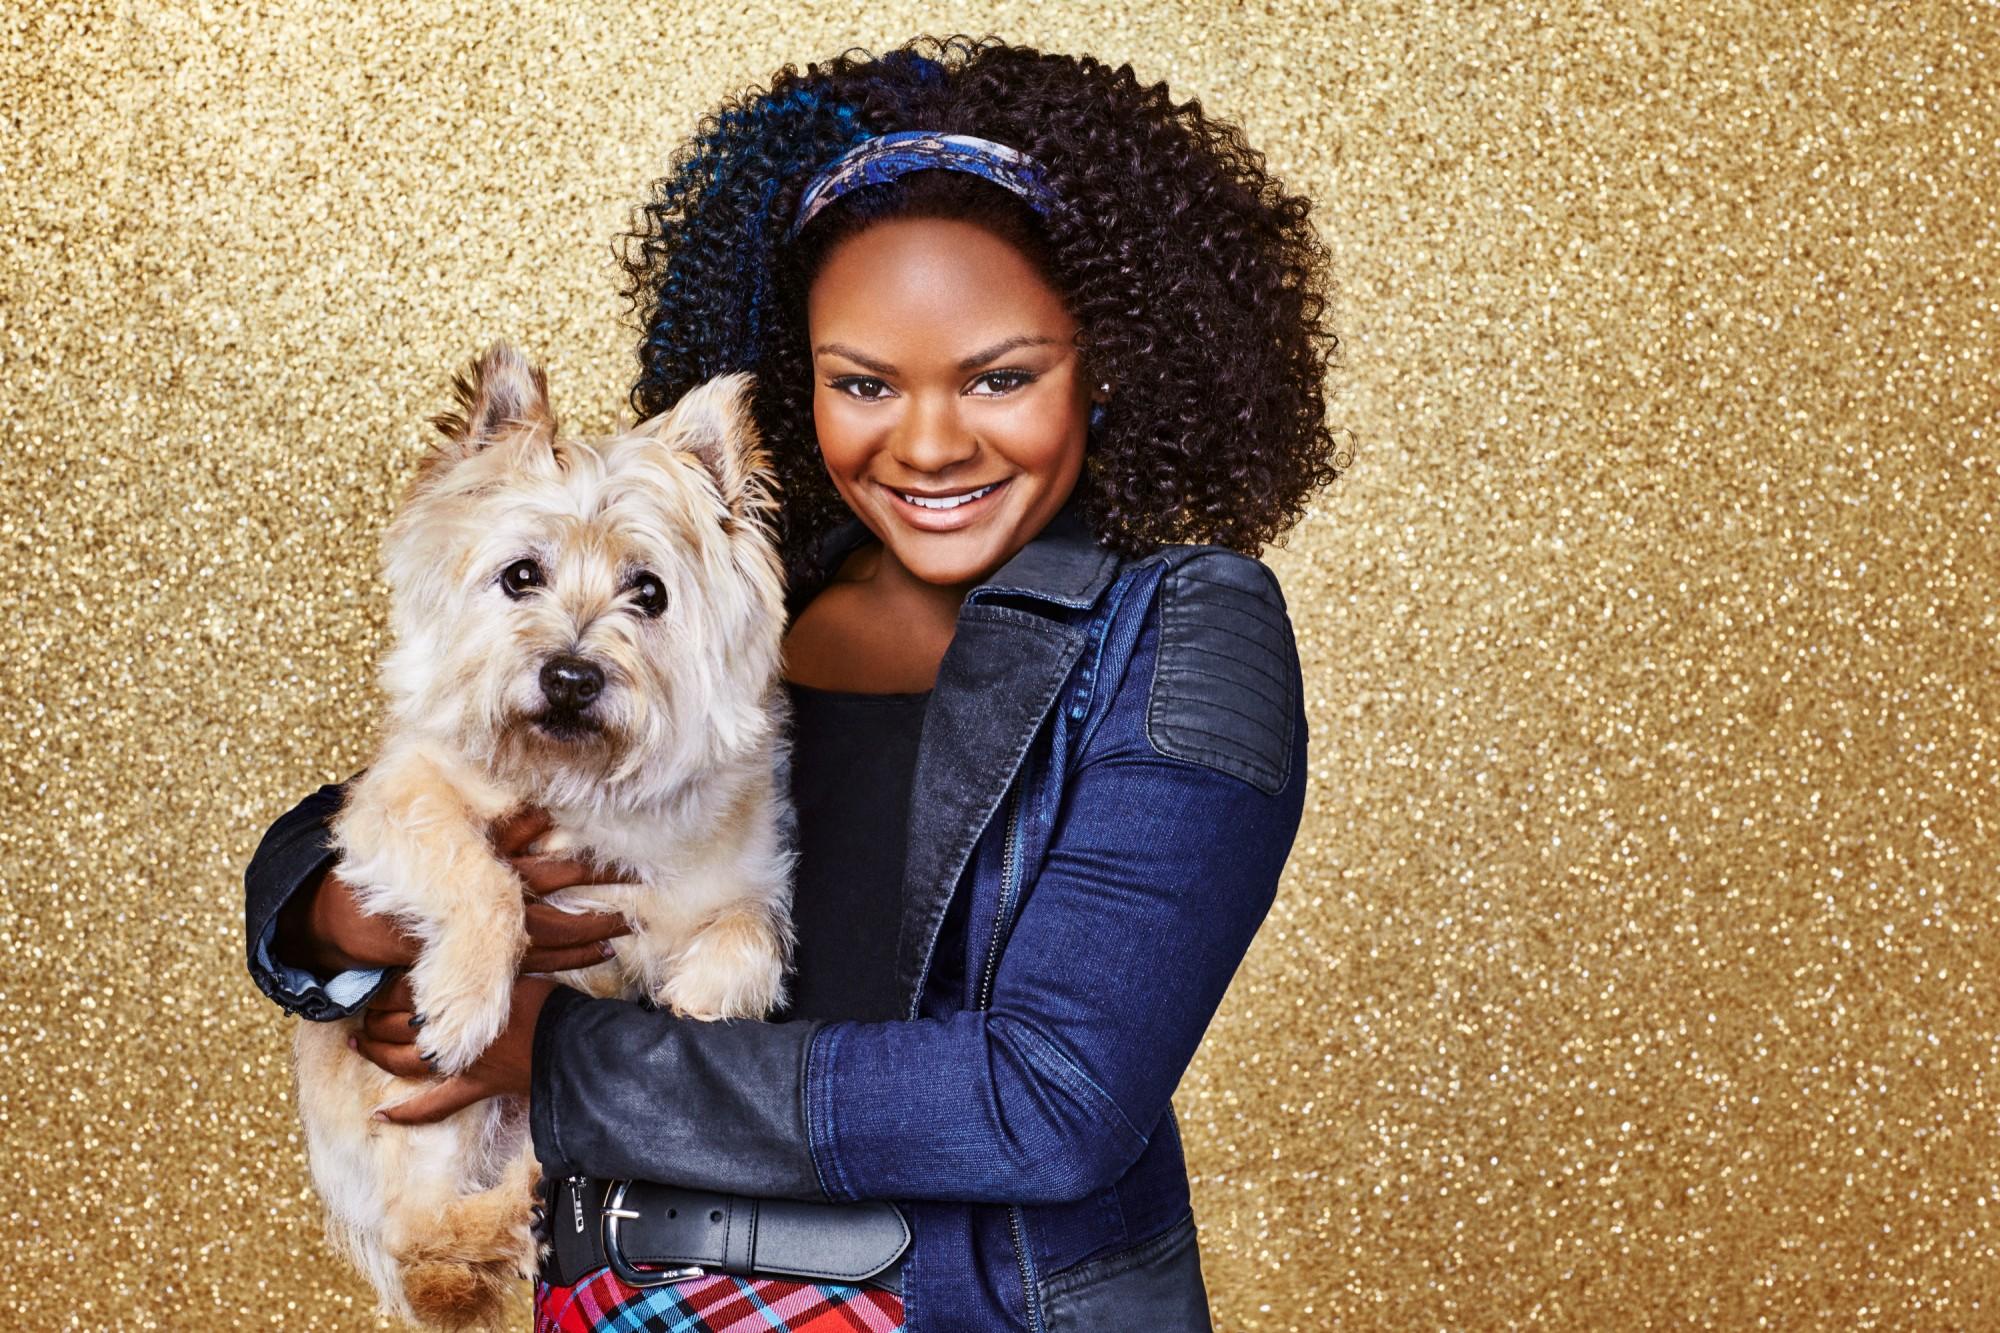 Shanice Williams stars as Dorothy Gale in NBC's The Wiz (2015)